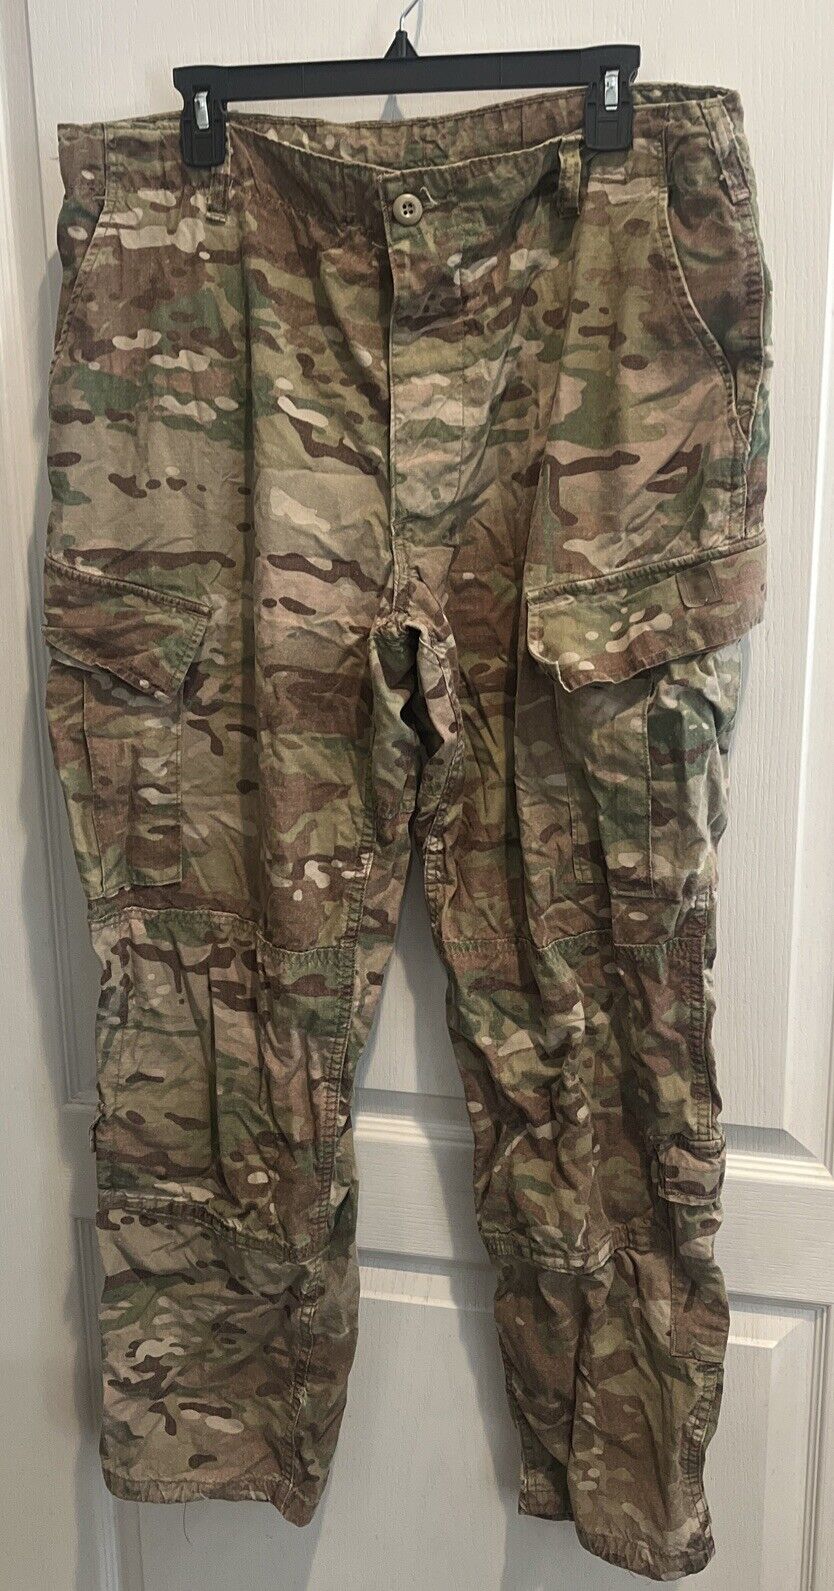 US ARMY PANTS MULTI CAM OCP Camo Cargo Ripstop Fire Res MENS REGULAR Used